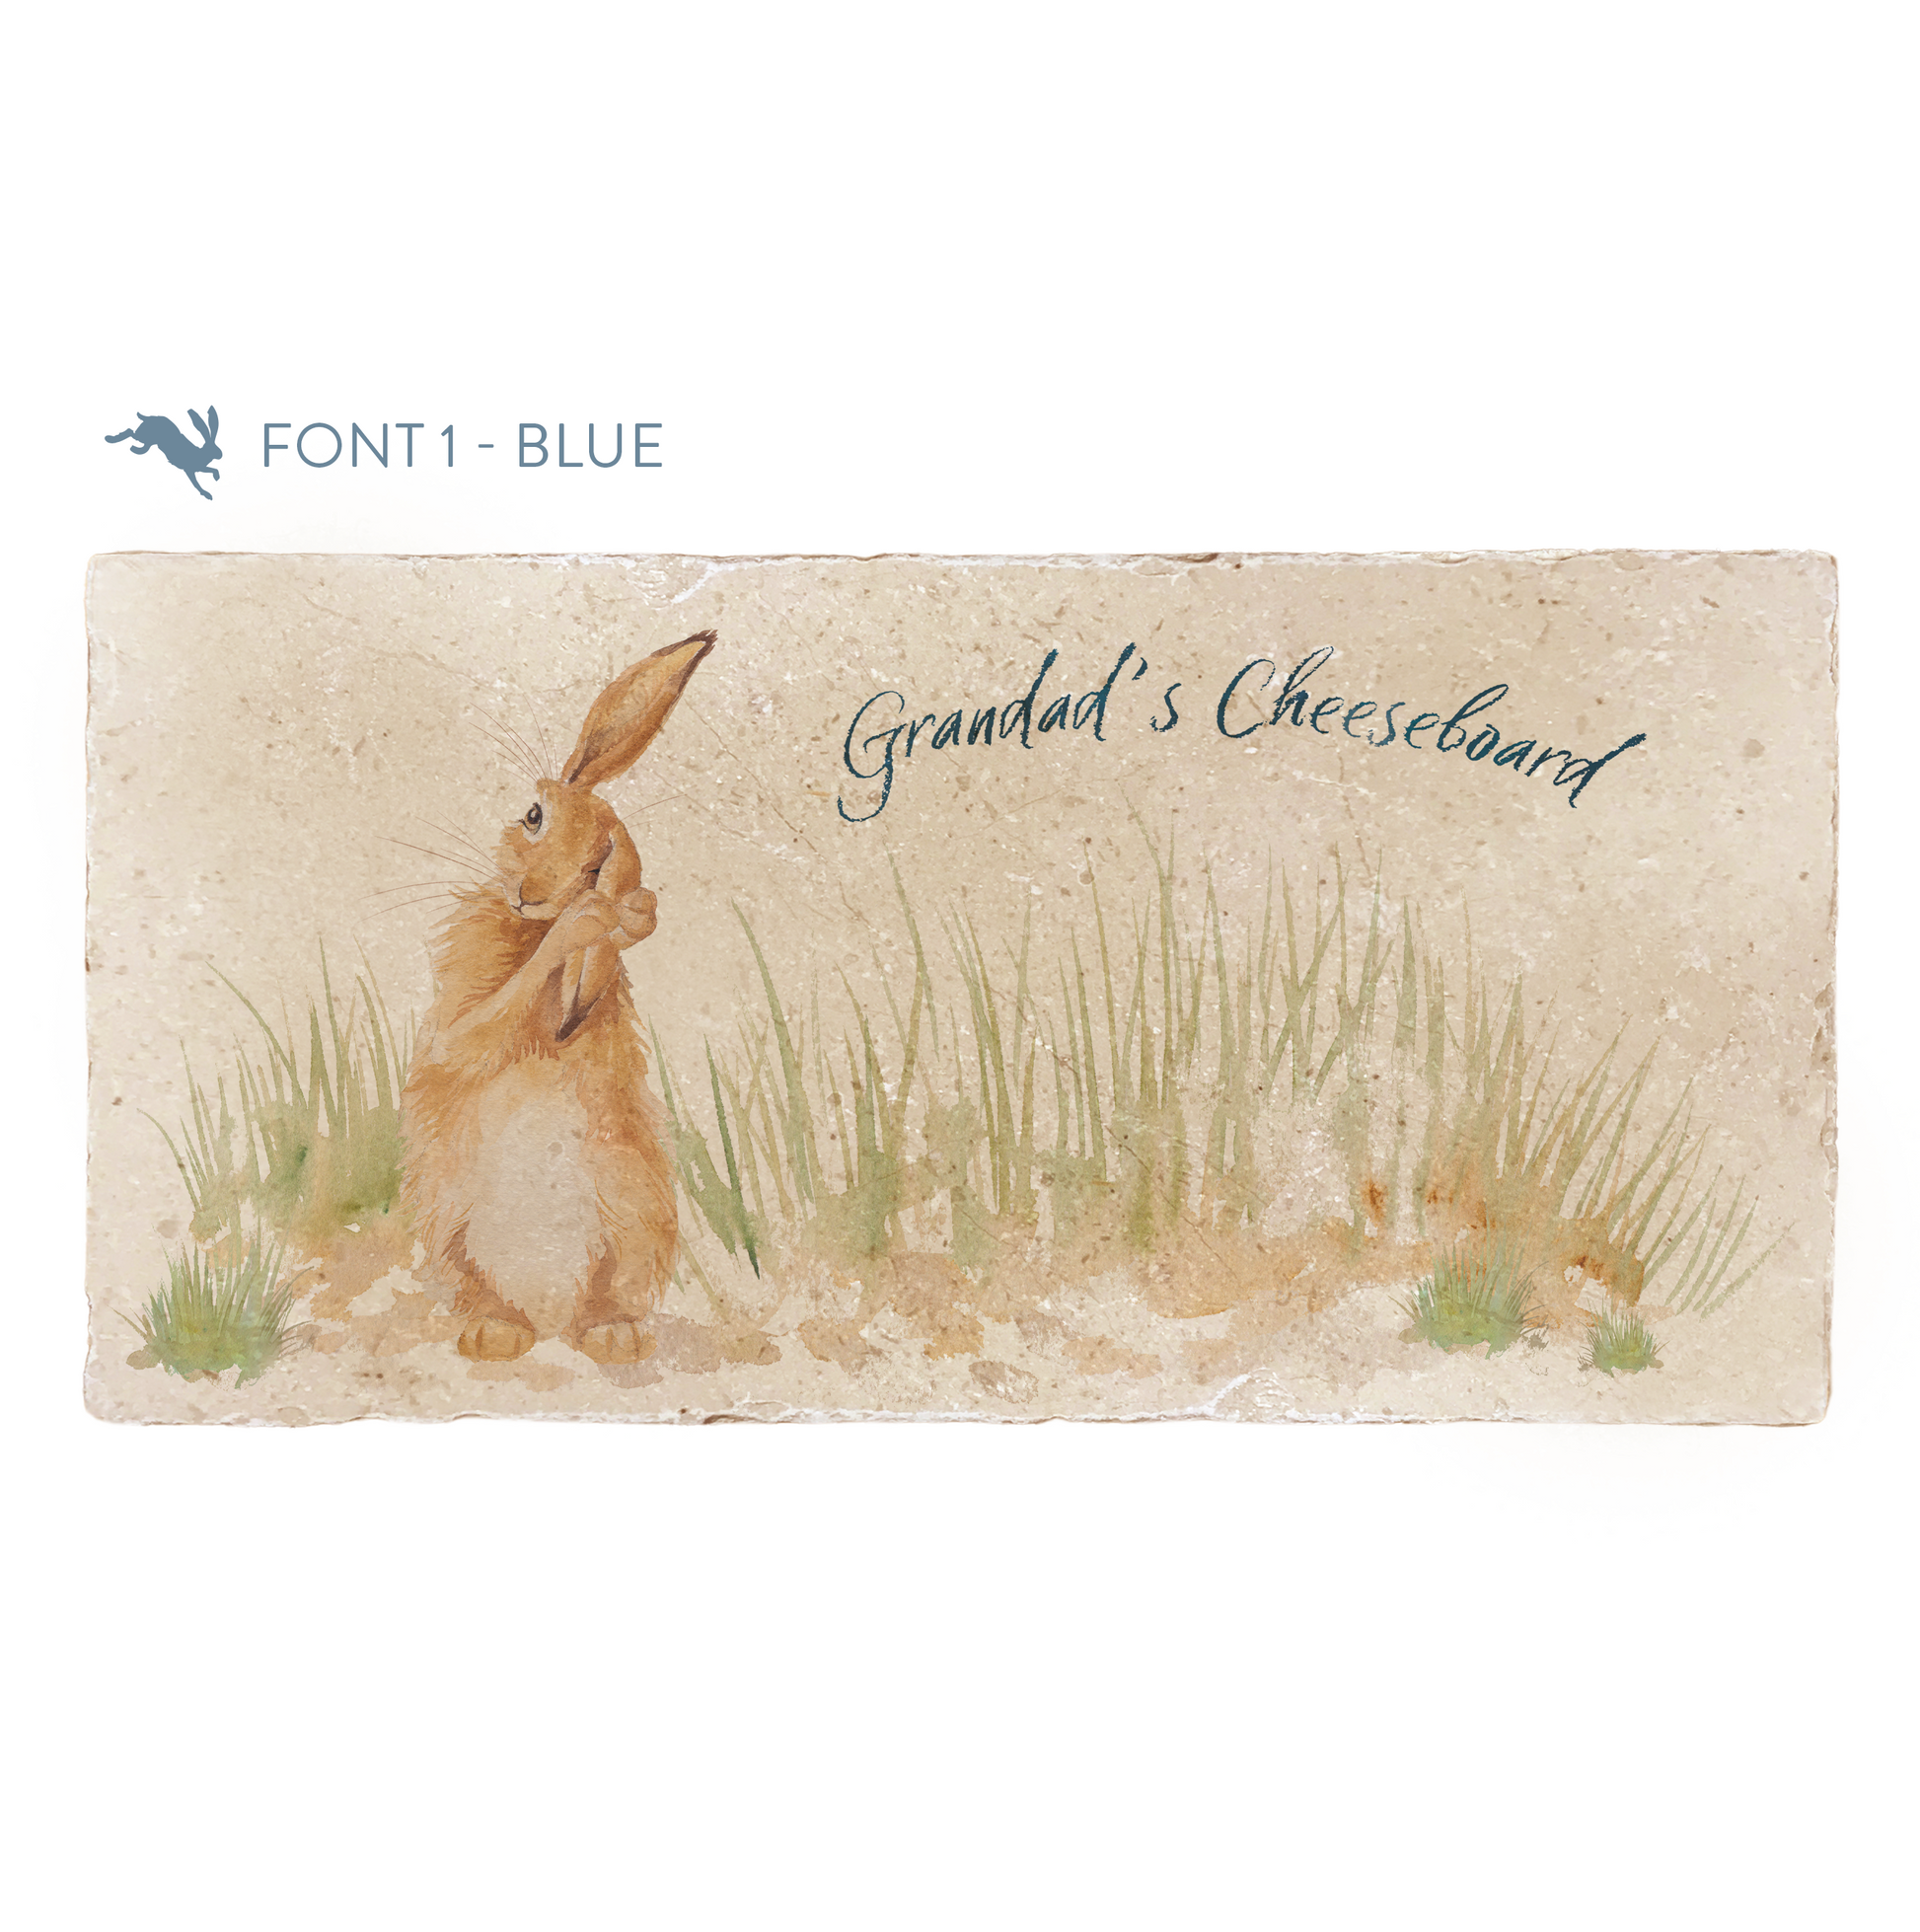 A personalised rectangular marble sharing platter featuring a hare washing his ear in a watercolour style. The example personalised dark blue text reads ‘Grandad’s Cheeseboard’ in a brush script font.